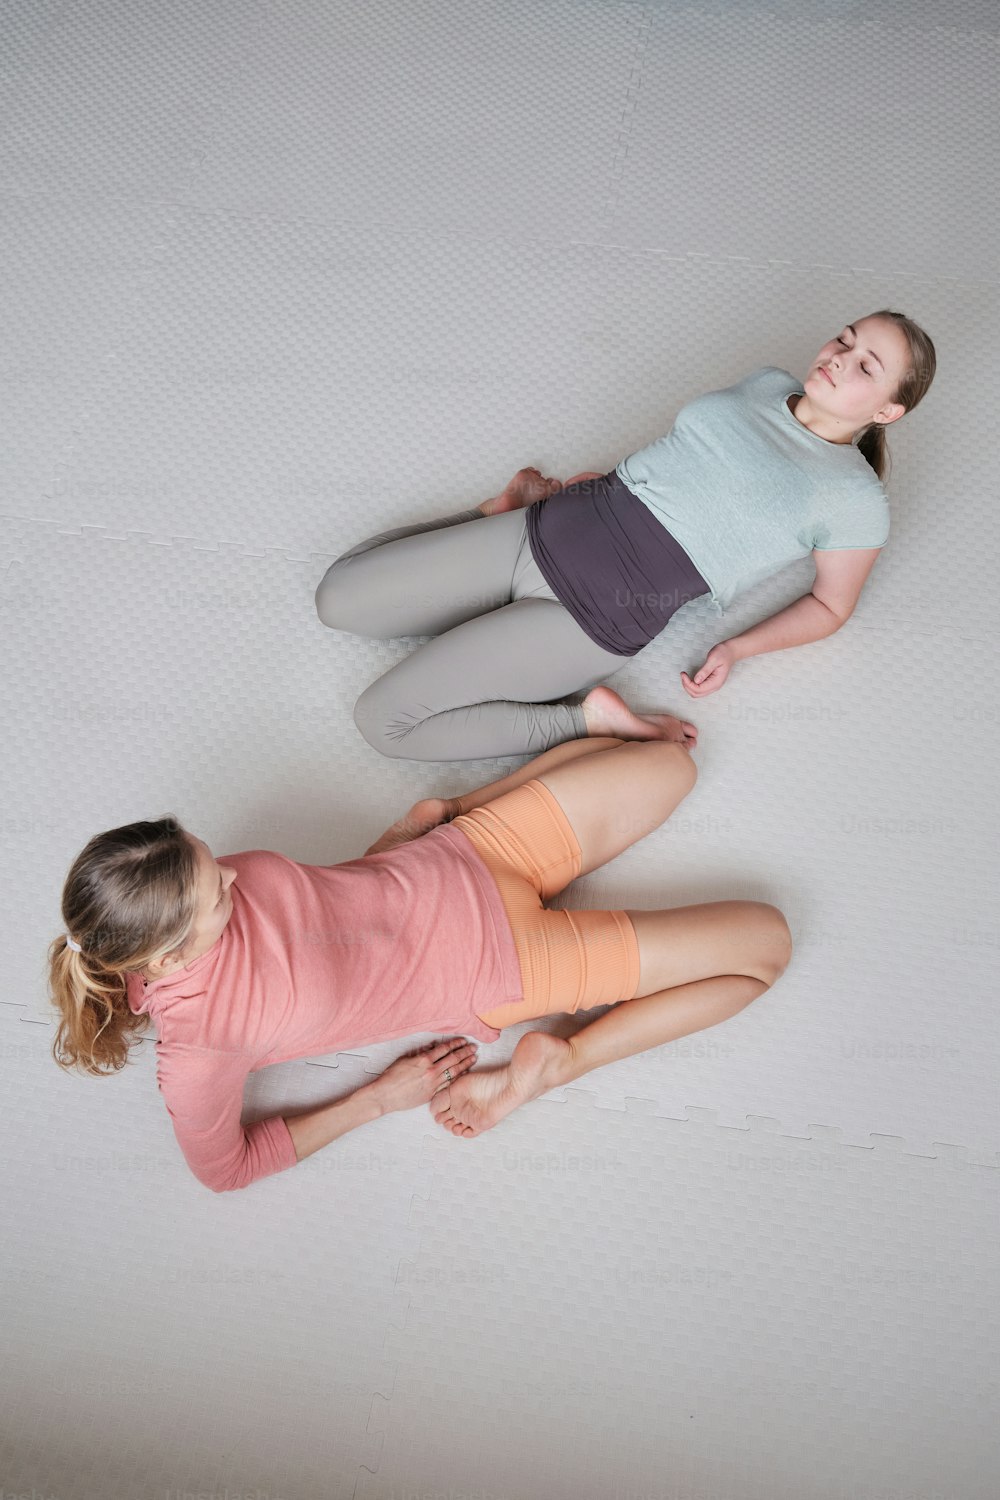 two young girls laying on a mattress together